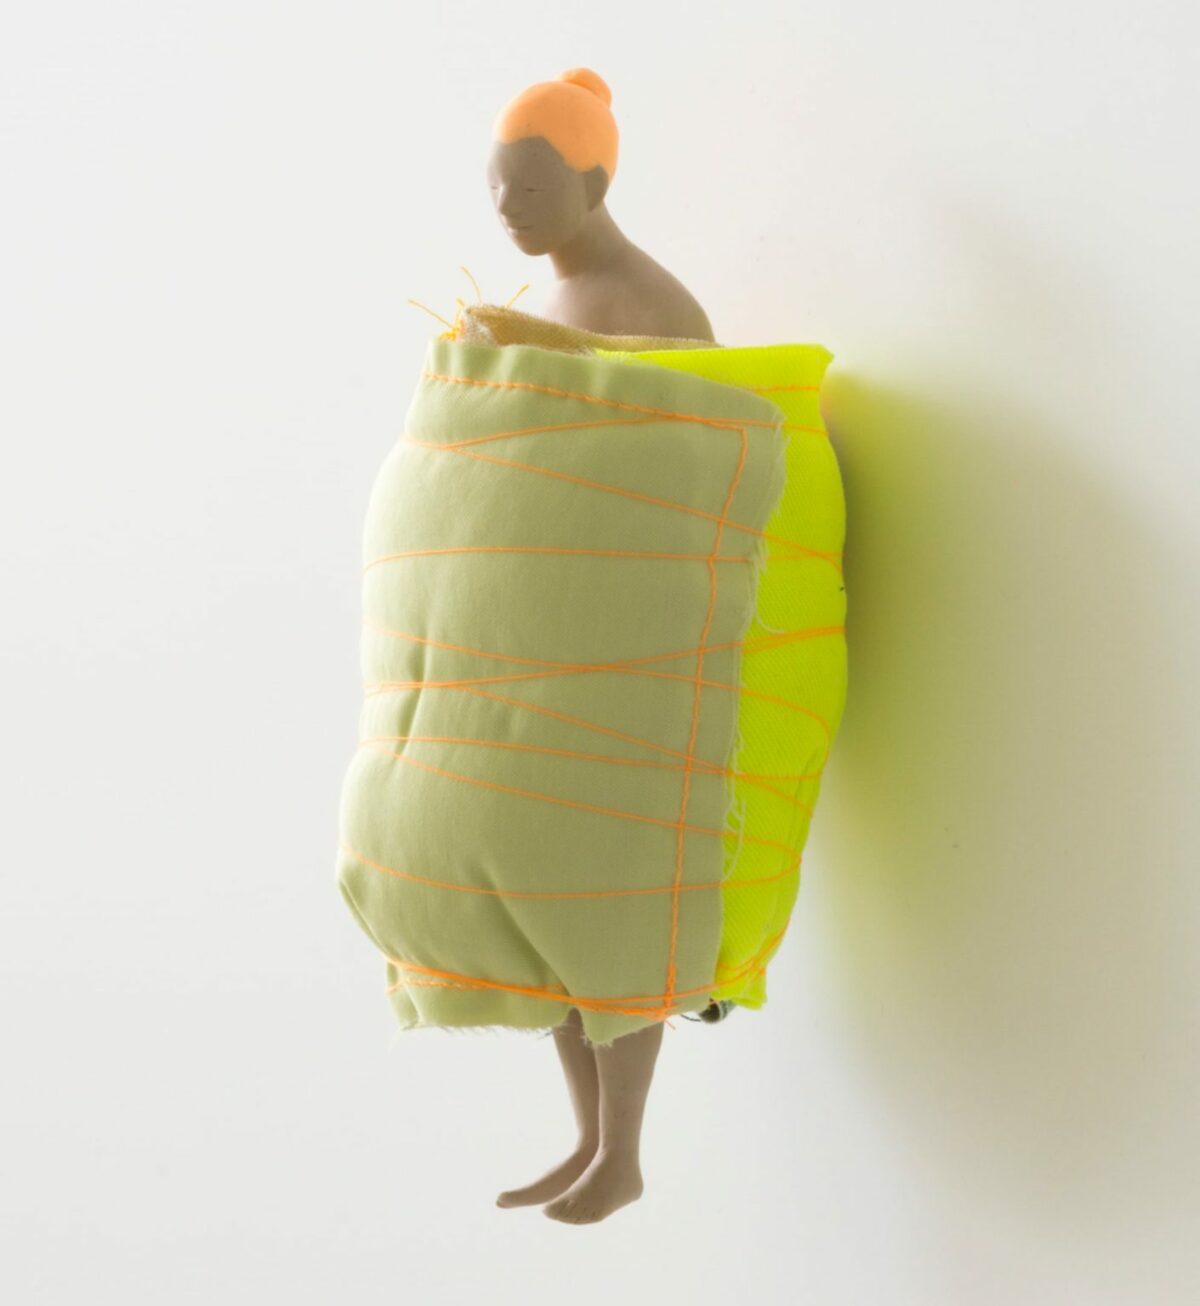 Peculiar Figure Sculptures In Vivid Colors By Frode Bolhuis (14)